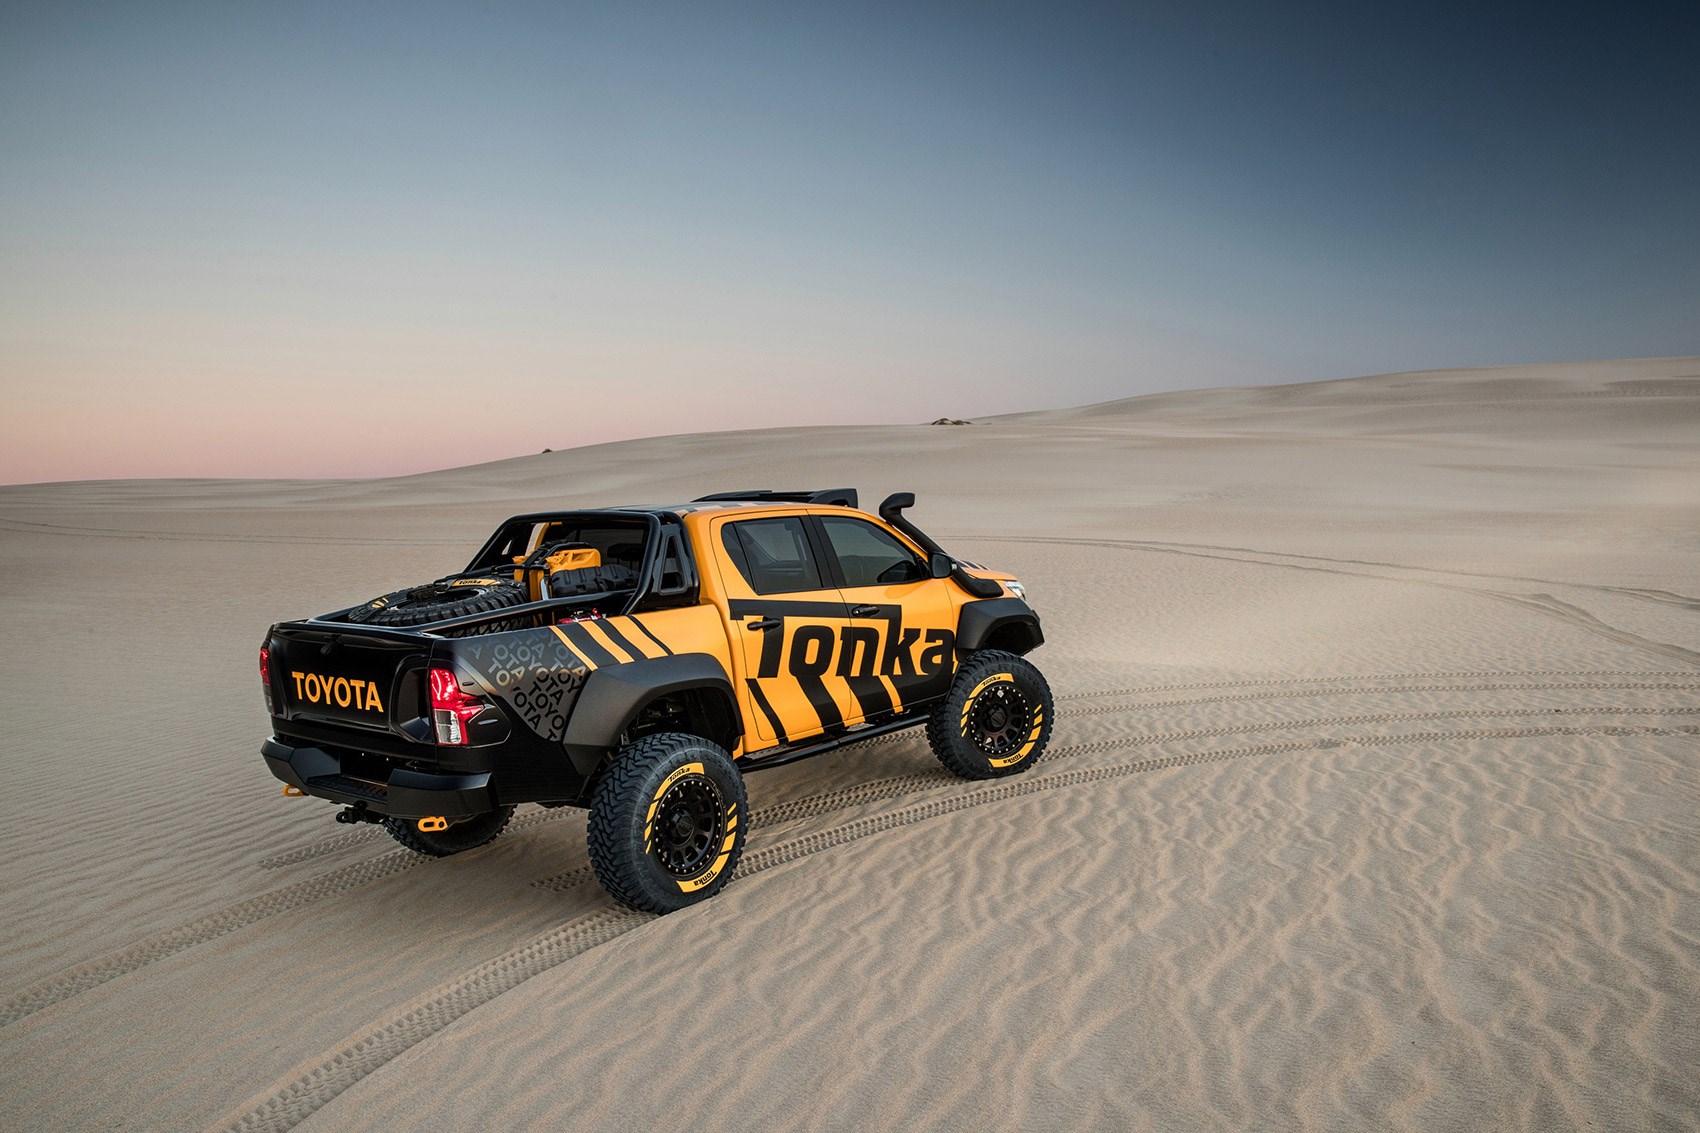 The Tonka Toyota One Off Toy Hilux Built Car Magazine